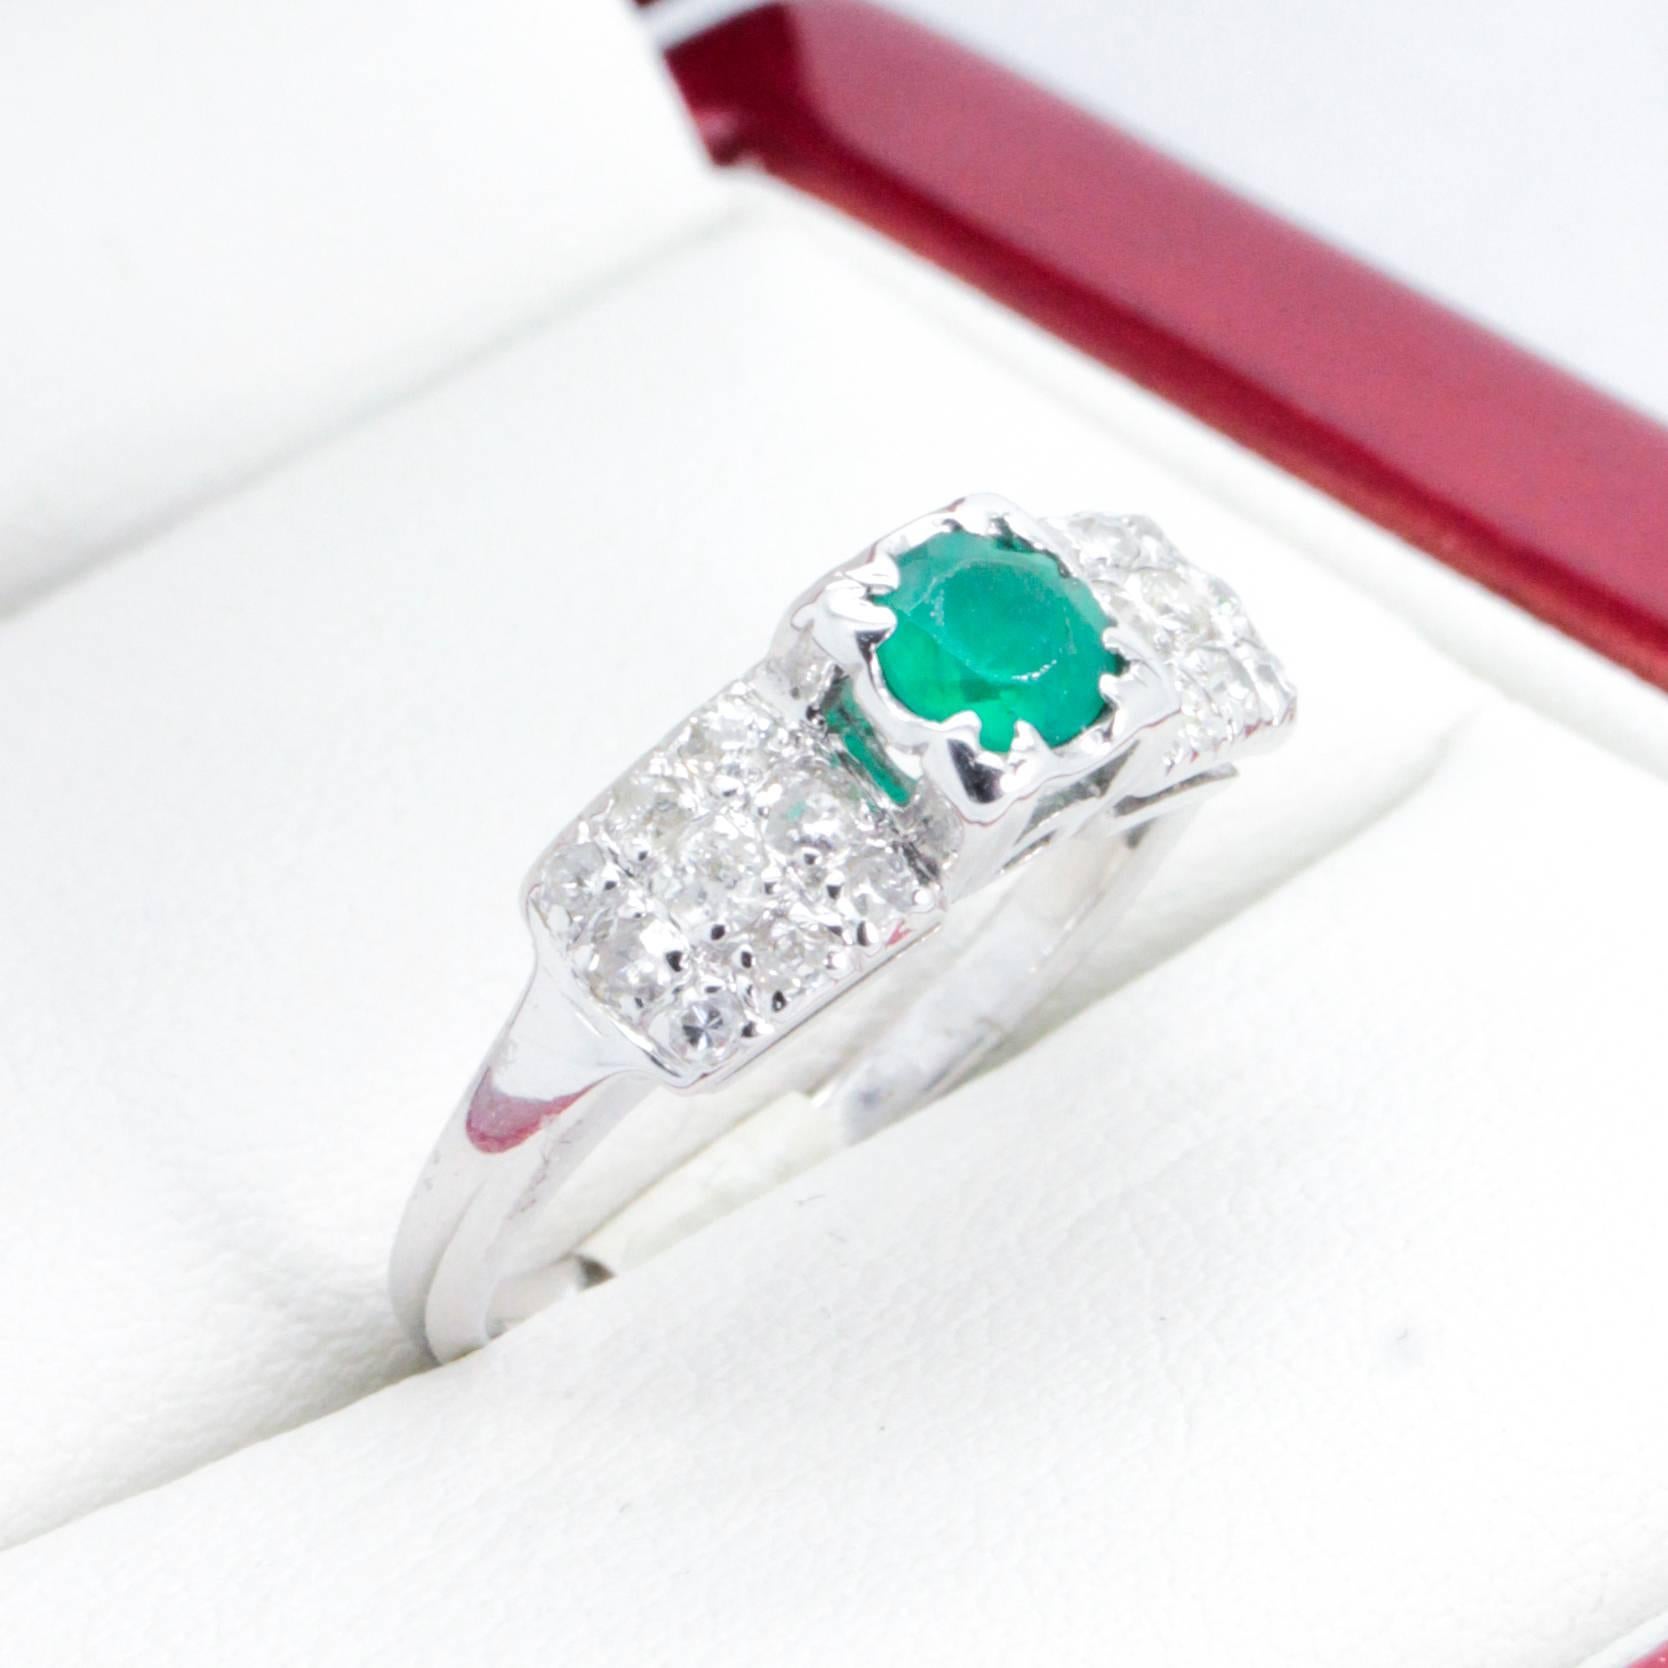 Vintage Emerald and Diamond Engagement Ring In Excellent Condition For Sale In Sydney CBD, AU